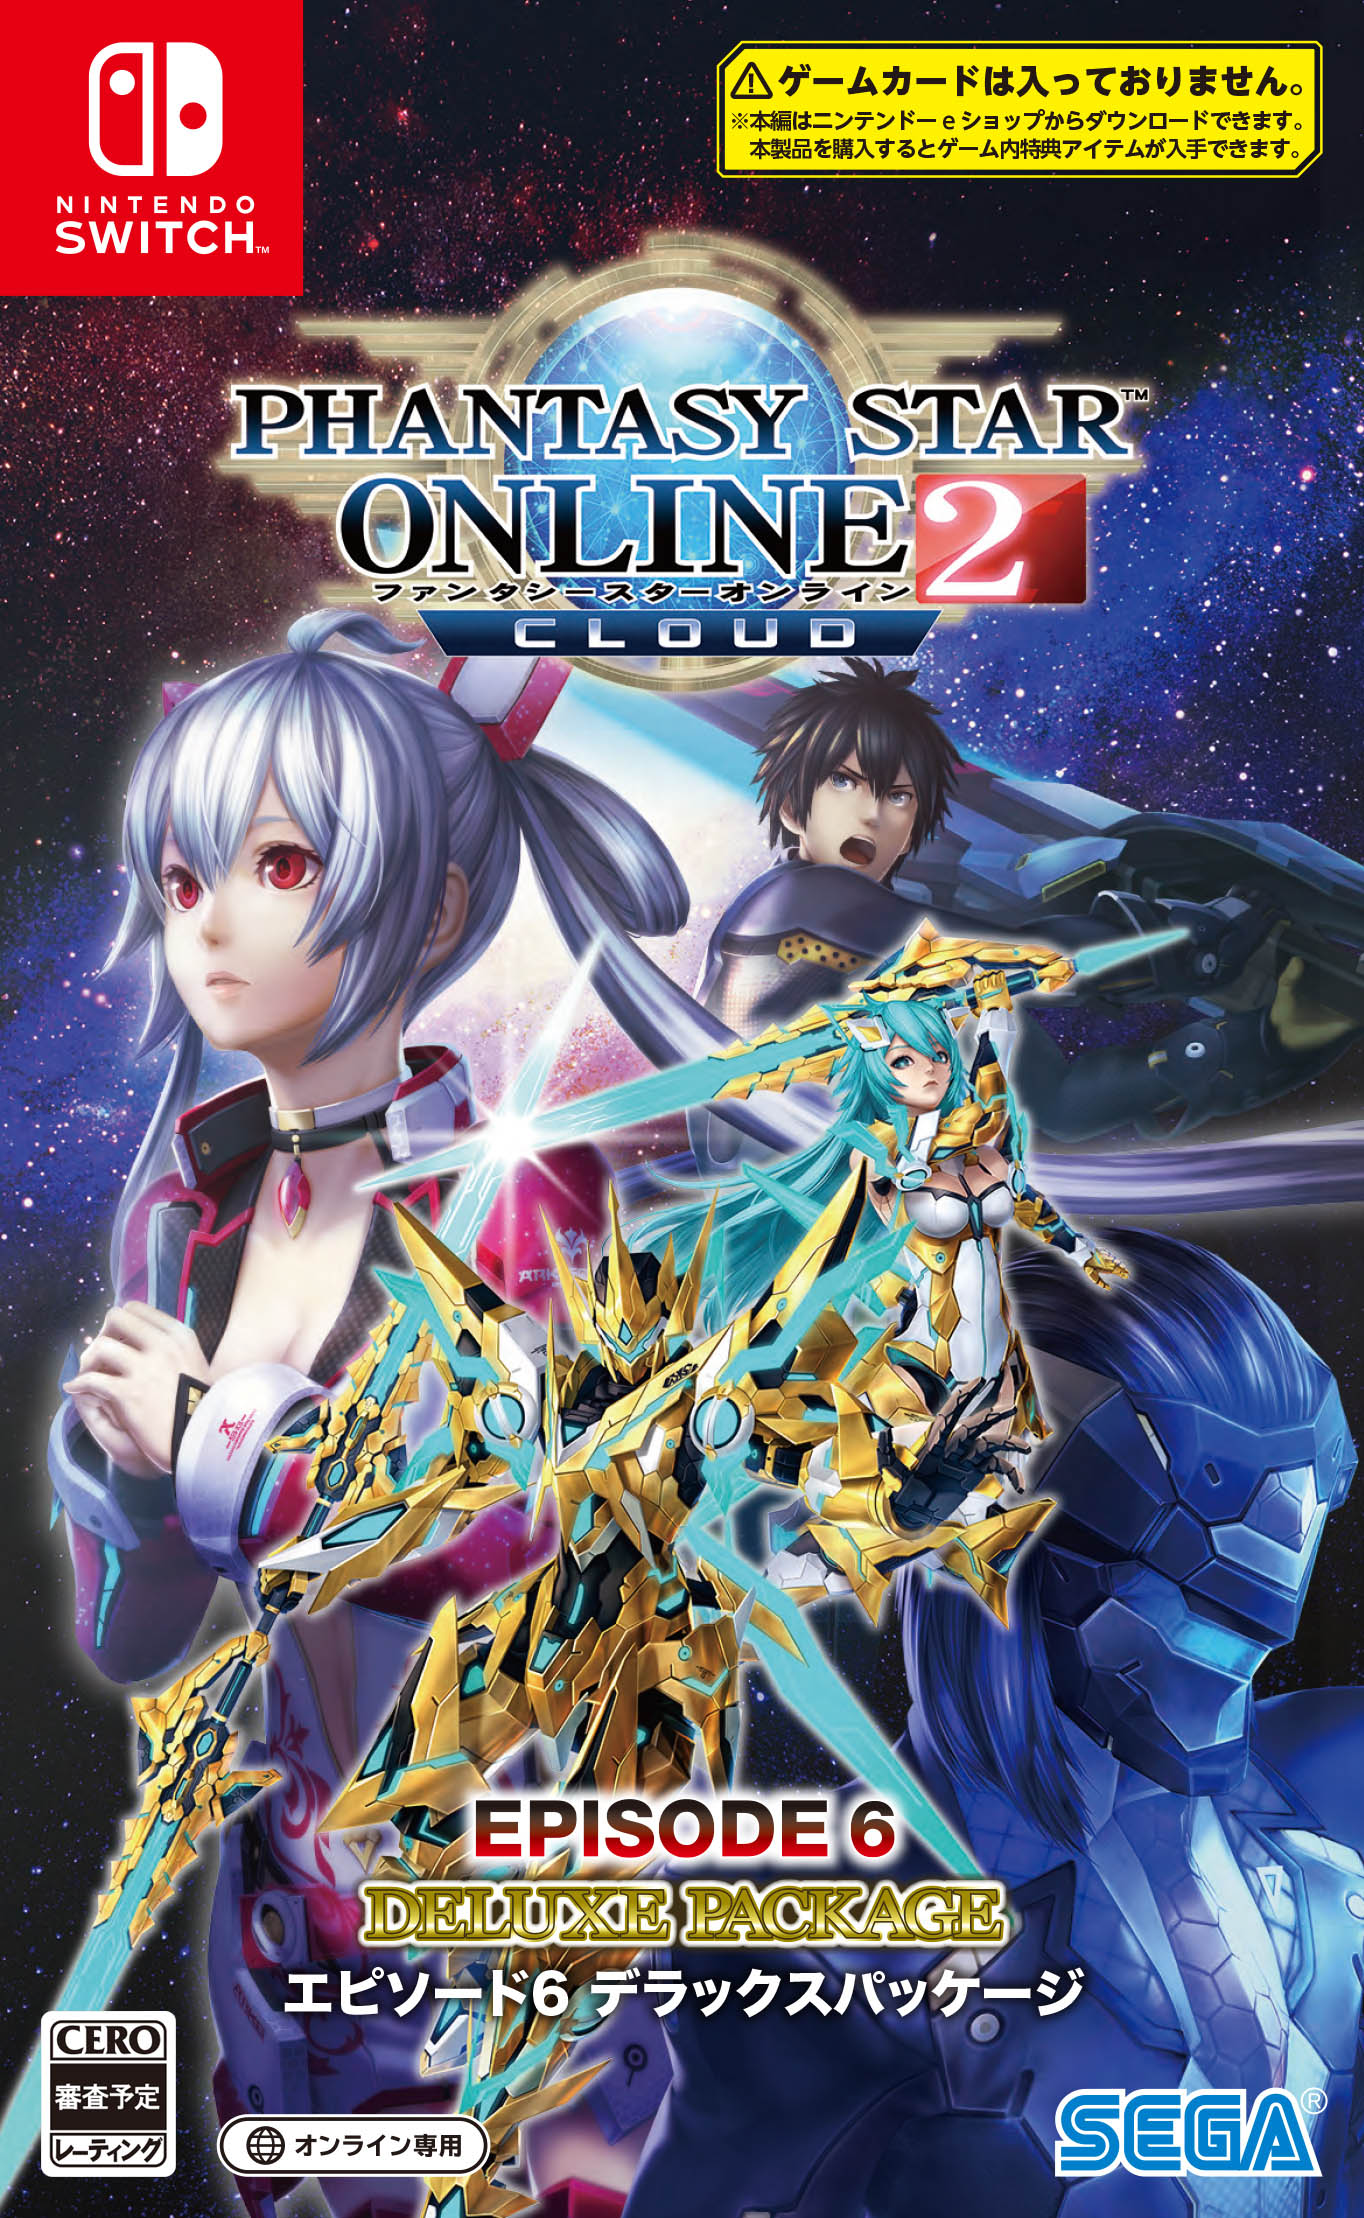 phantasy-star-online-2-episode-6-deluxe-package-for-ps4-switch-and-pc-launches-april-23-in